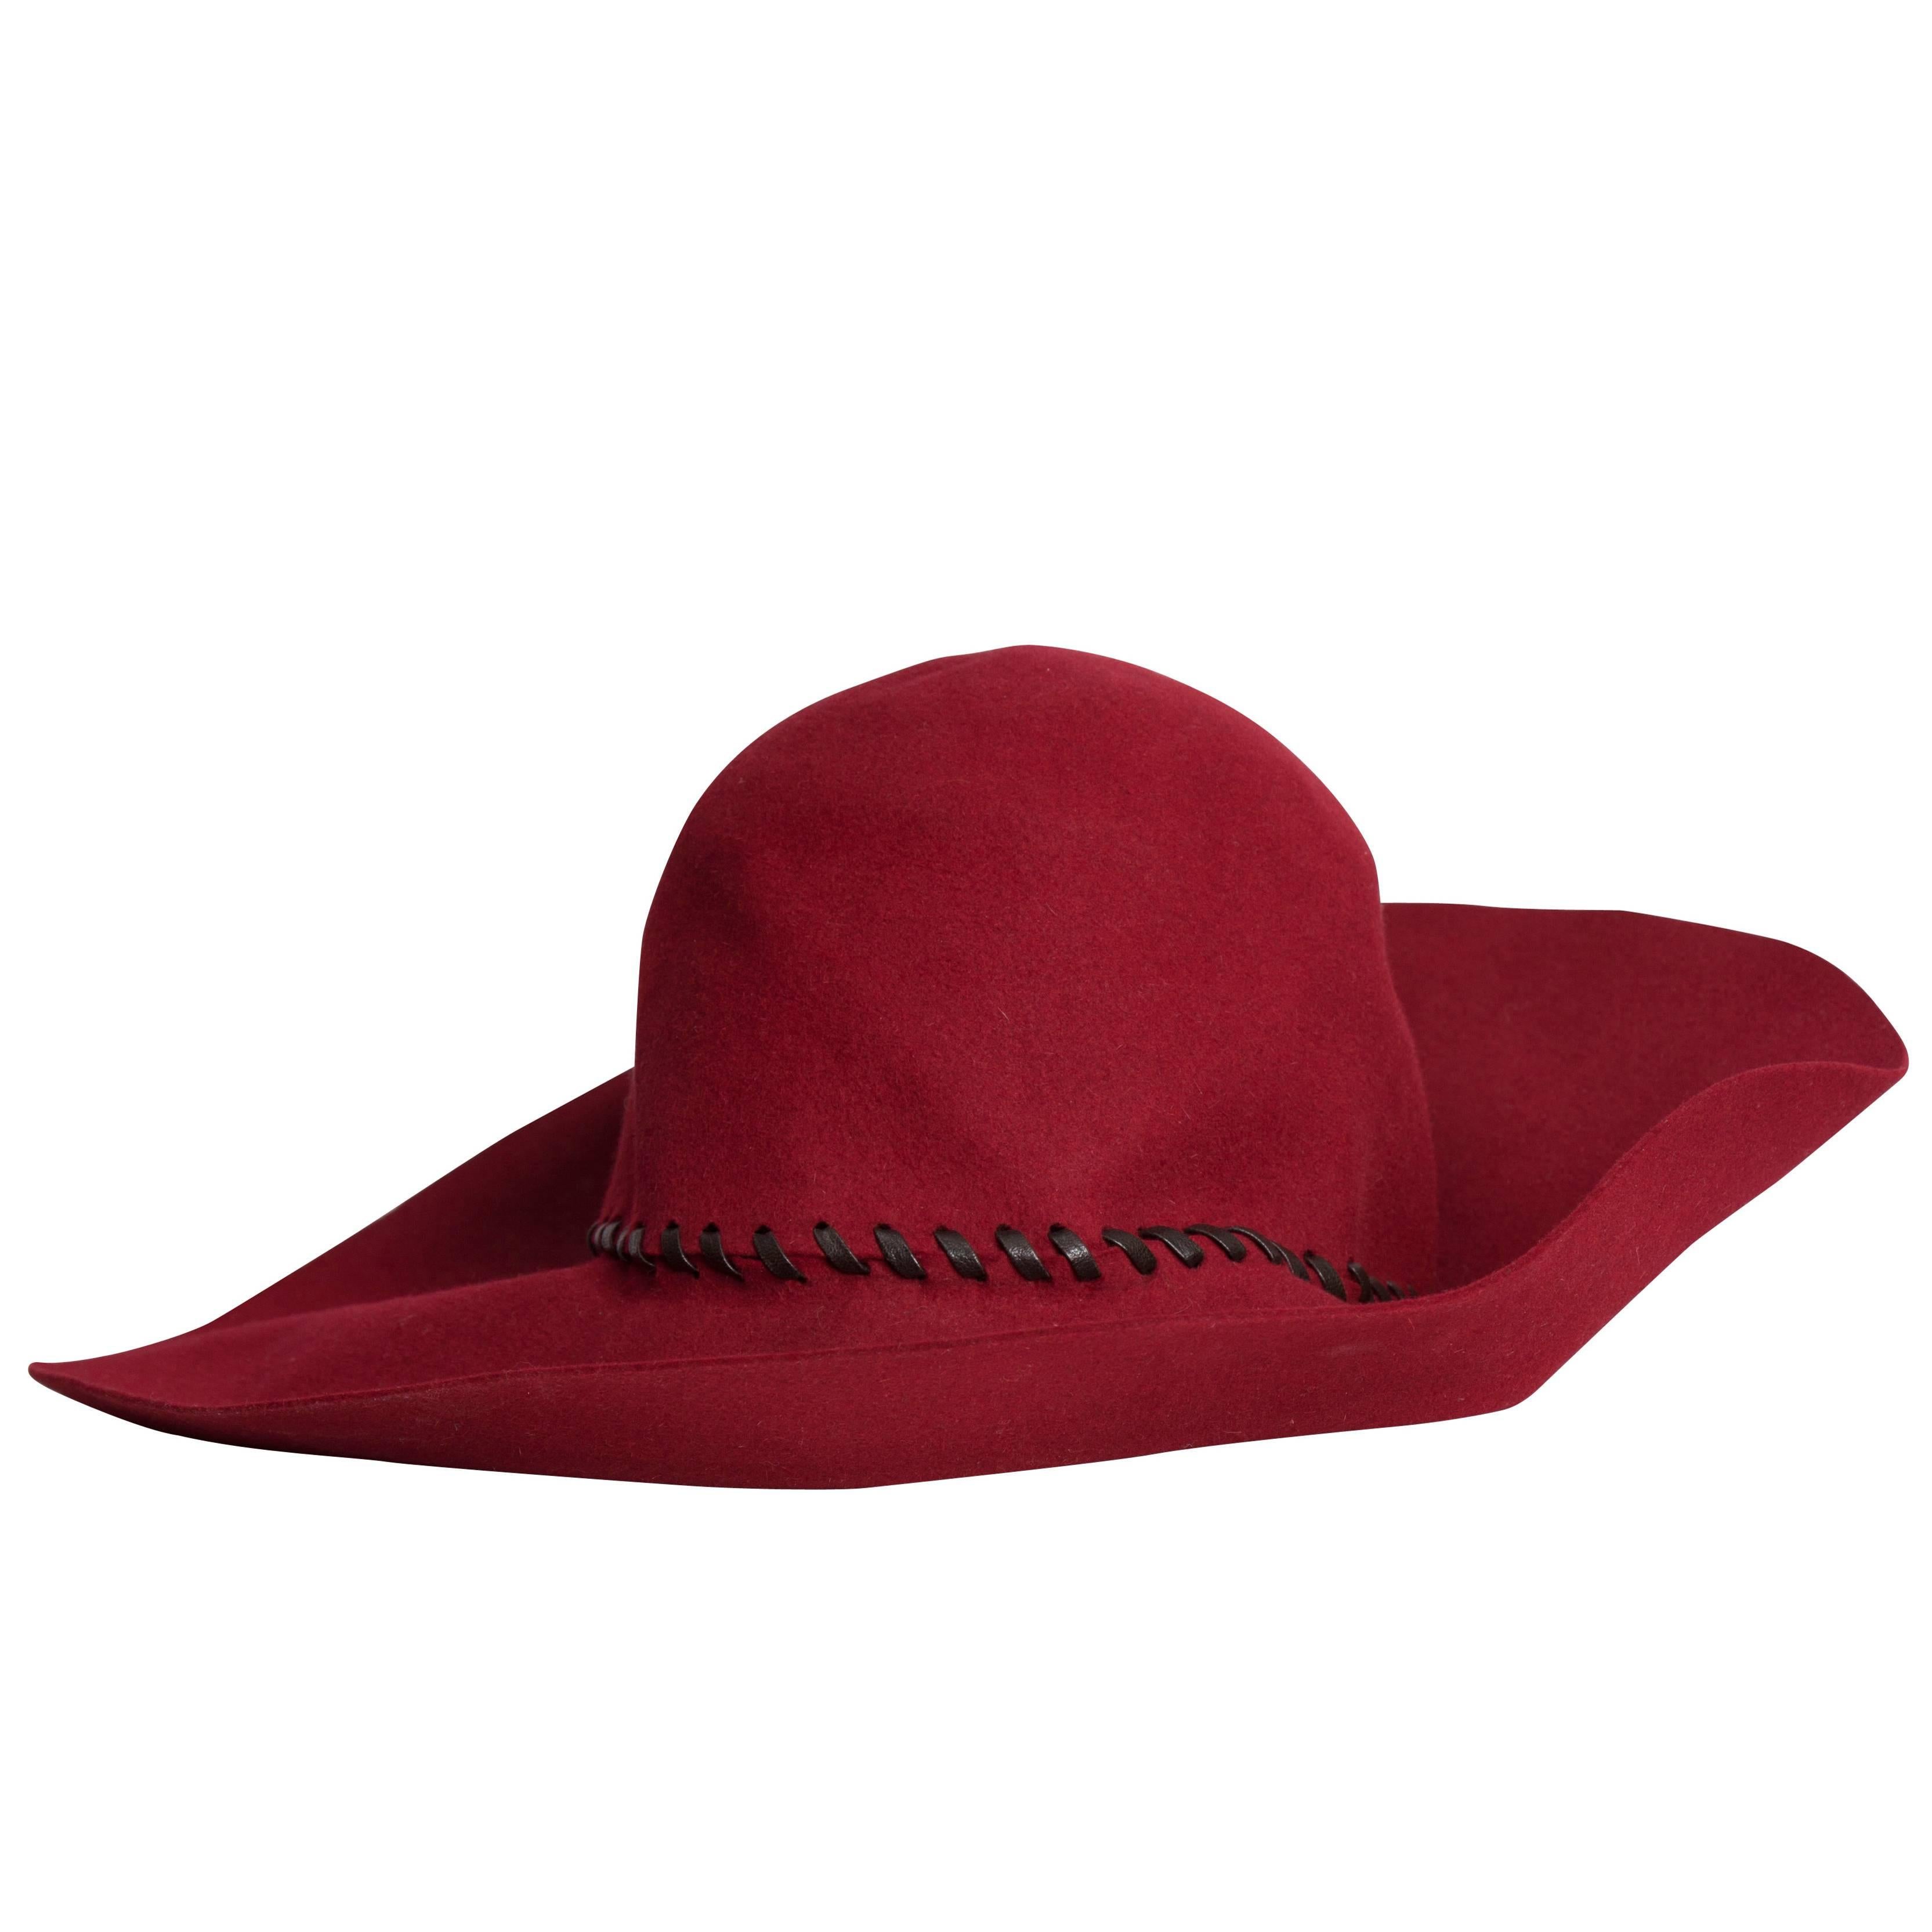 1970s Yves Saint Laurent Couture Crimson Floppy Felt Hat with Leather Stitching For Sale